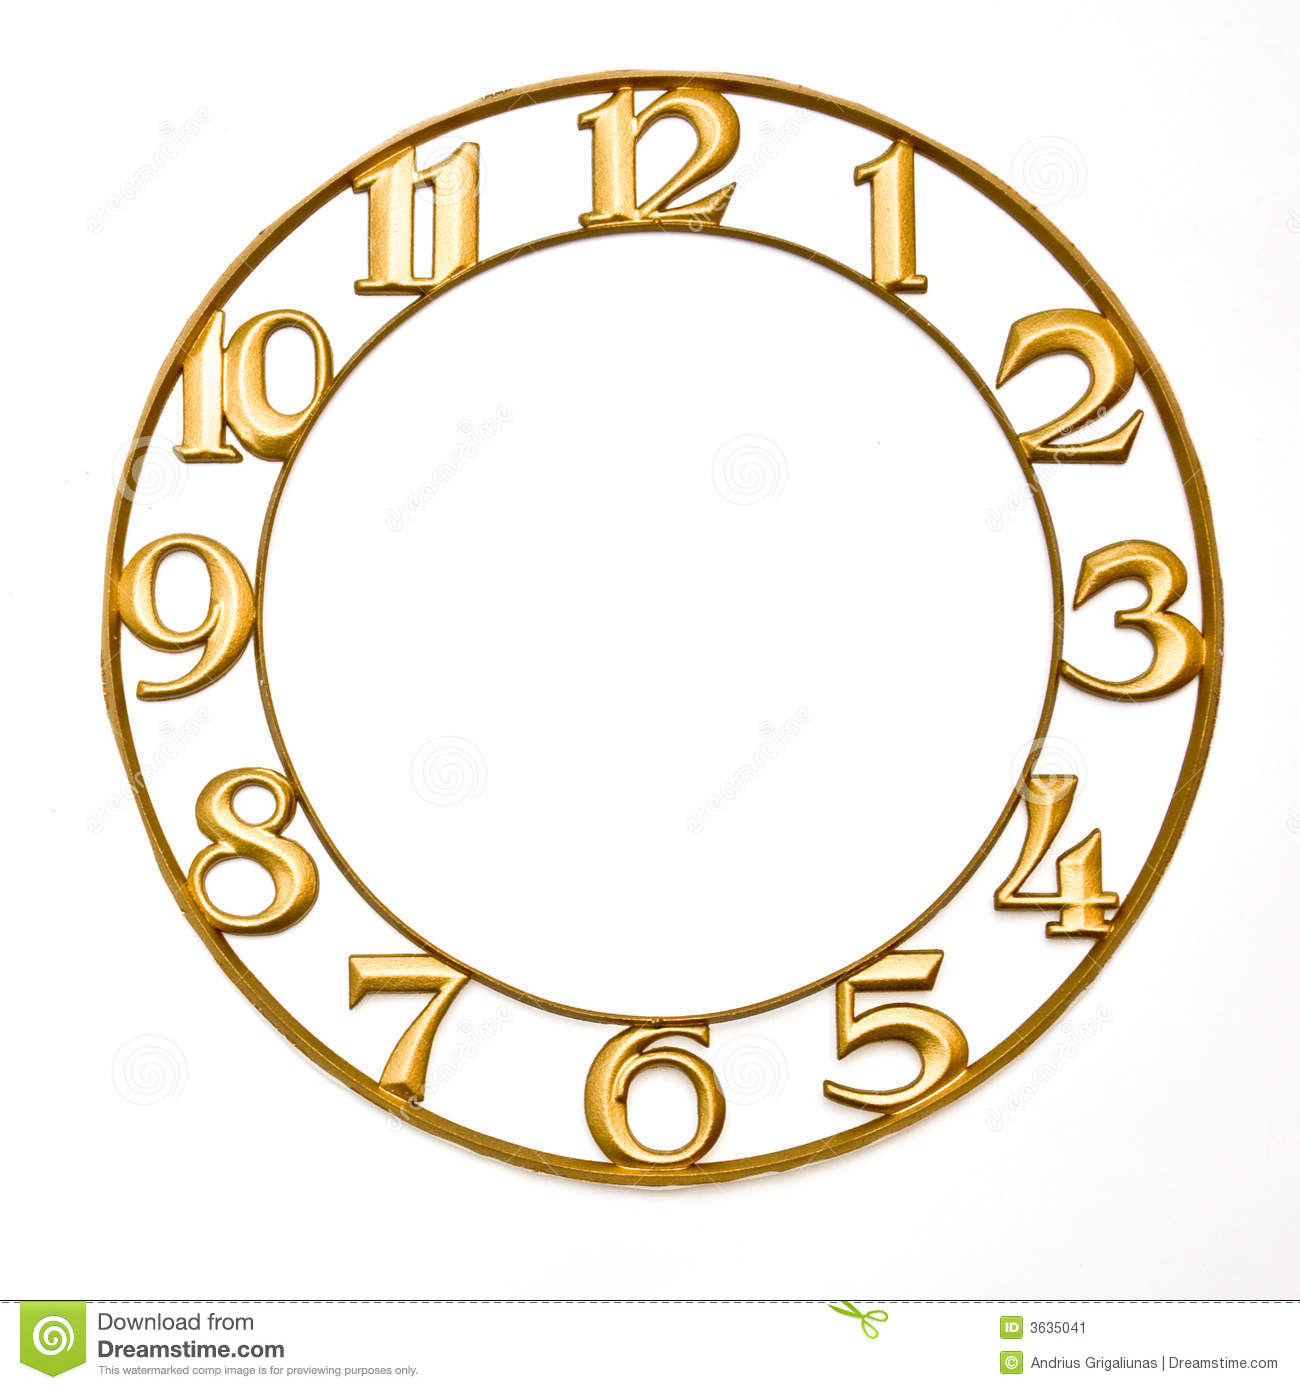 Clock Face Without Hands On White Background Mr No Pr No 3 4733 6